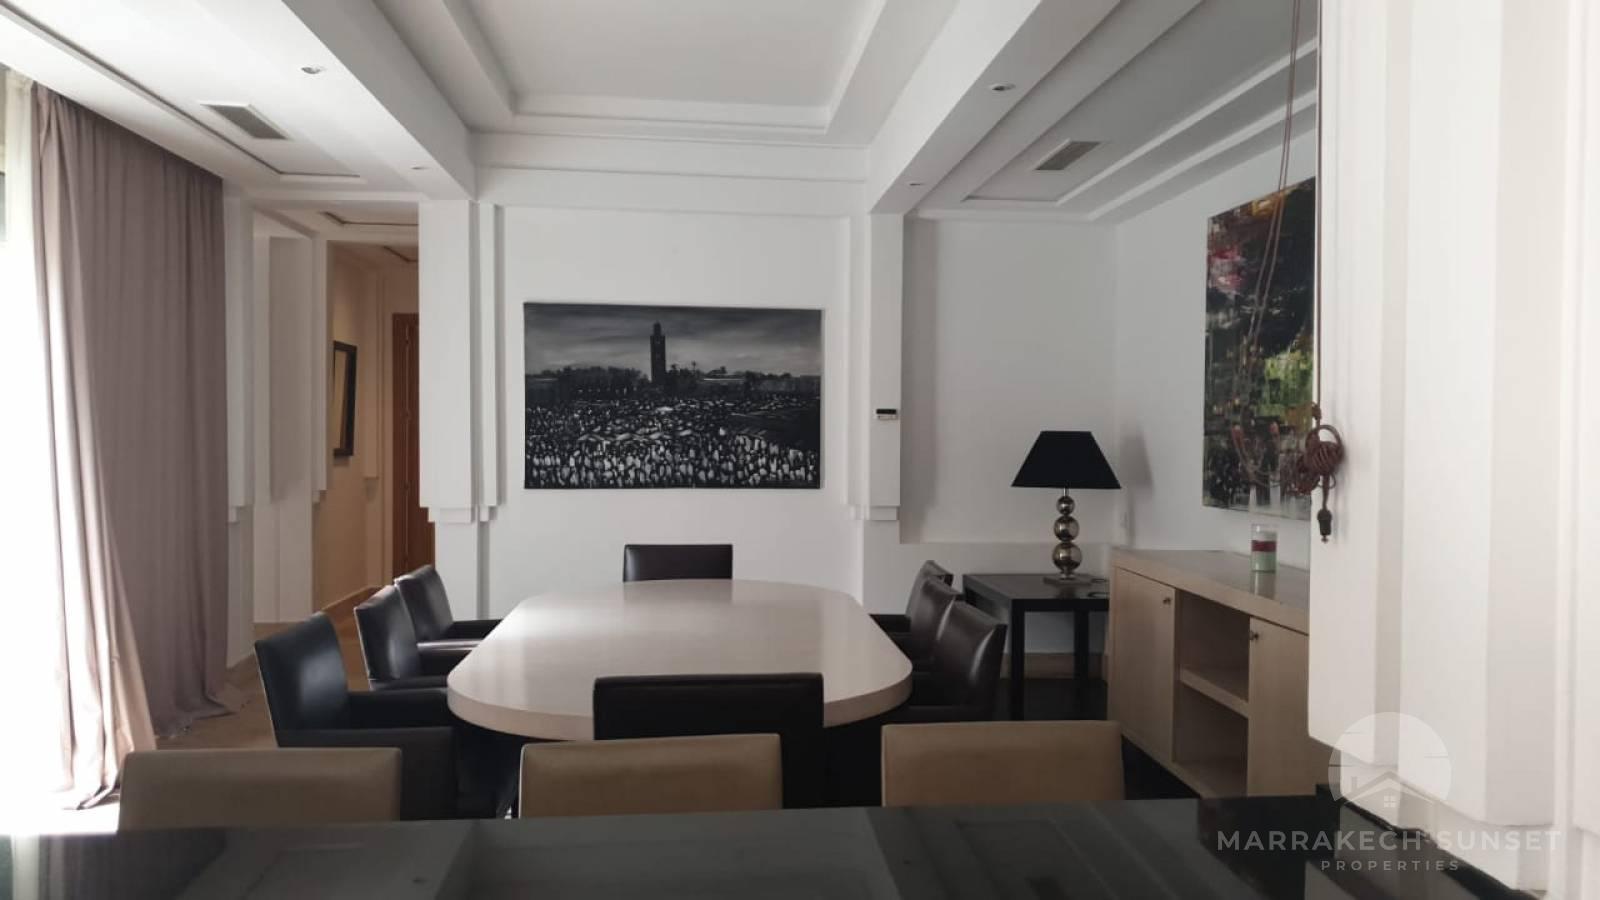 4 bedroom villa for rent at the Naoura Barrière hotel complex